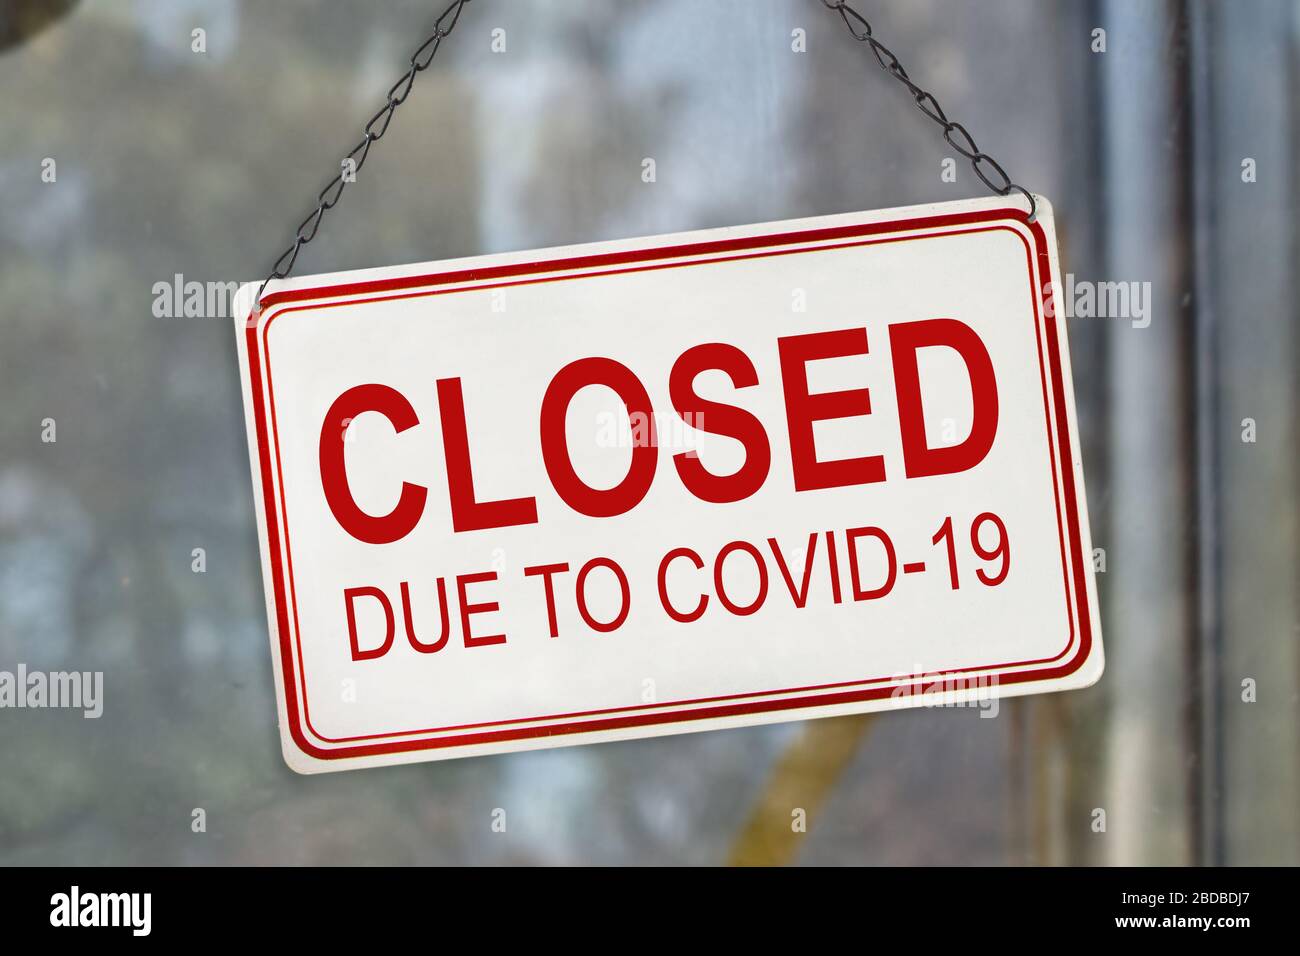 Closed sign due to Covid-19, Coronavirus outbreak lockdown, on the window of a shop. Economic crisis concept Stock Photo